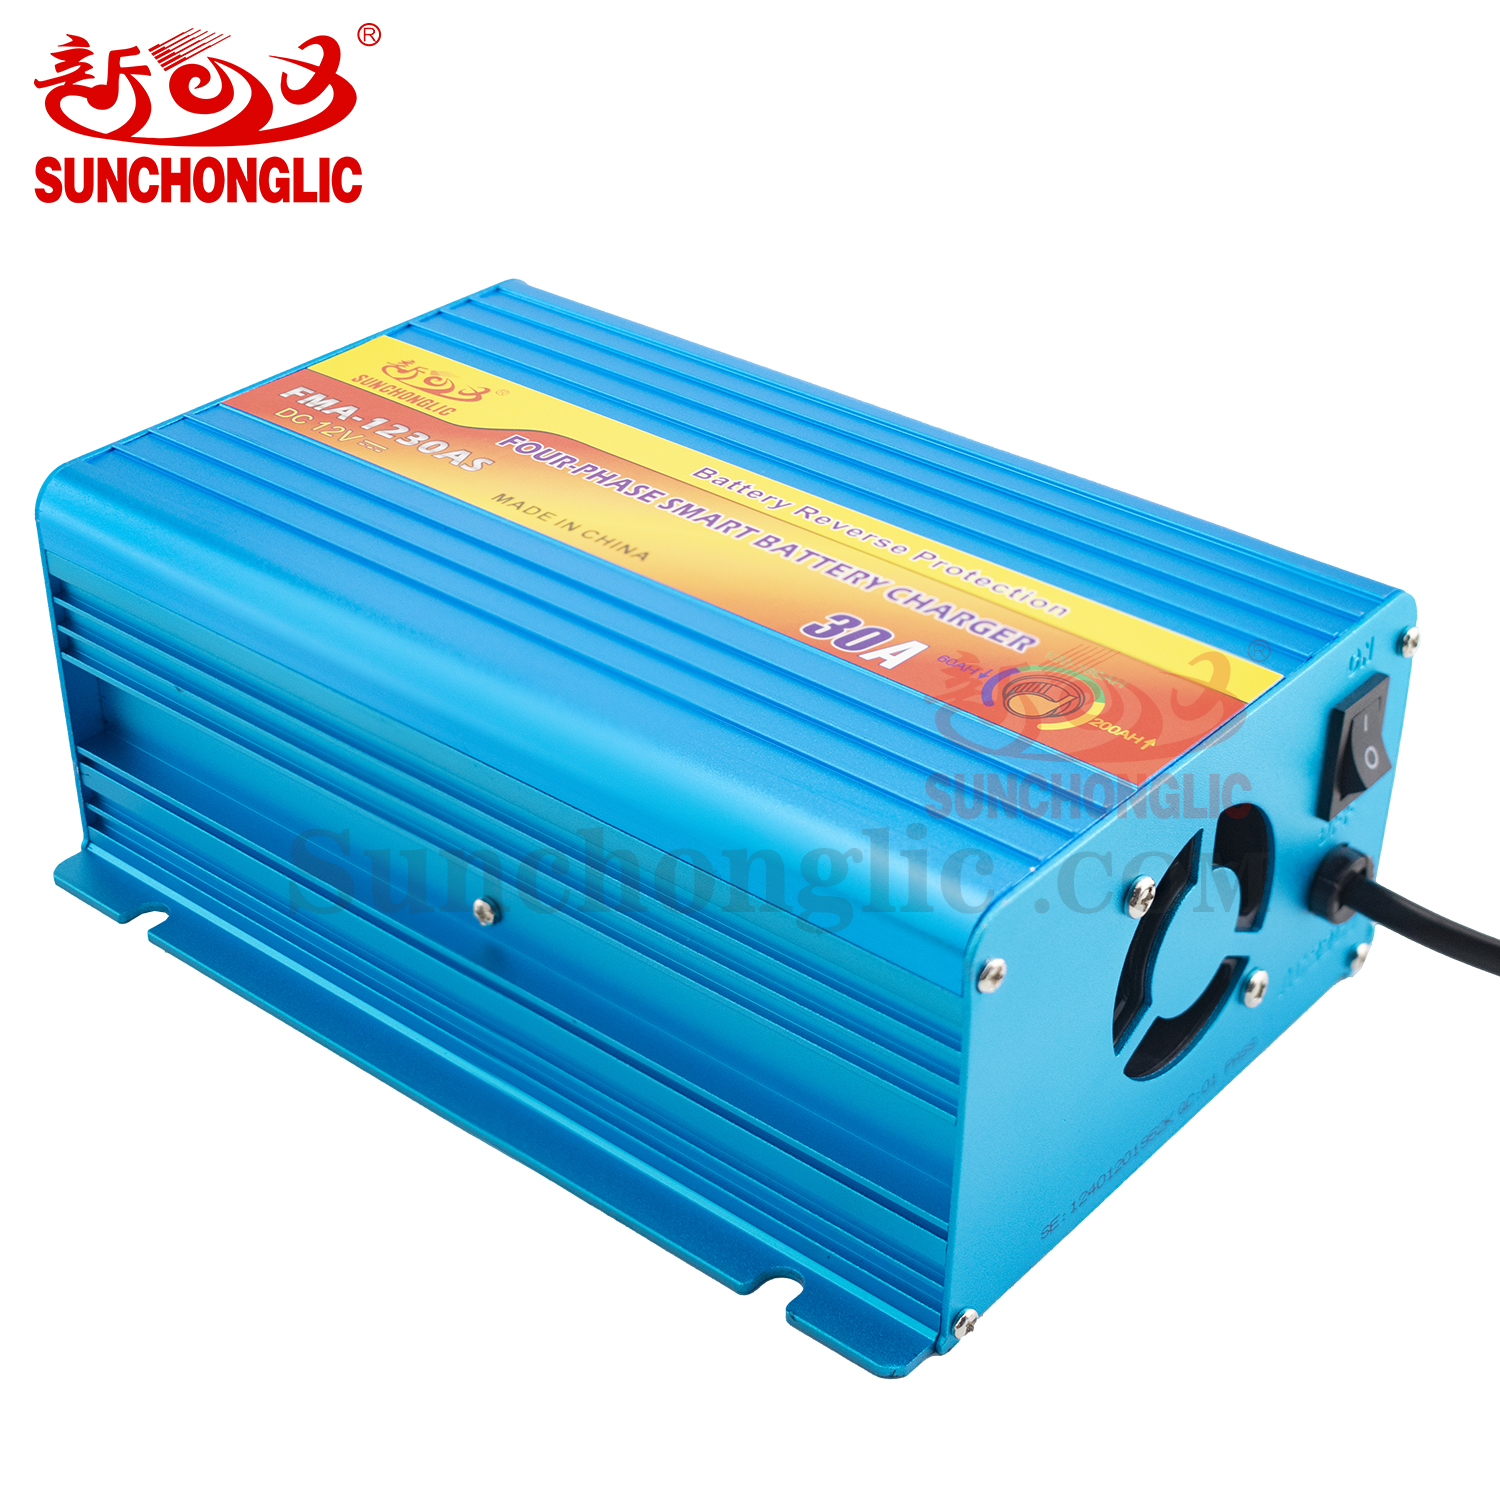 Four-phase 12V 30A agm gel lead acid battery charger